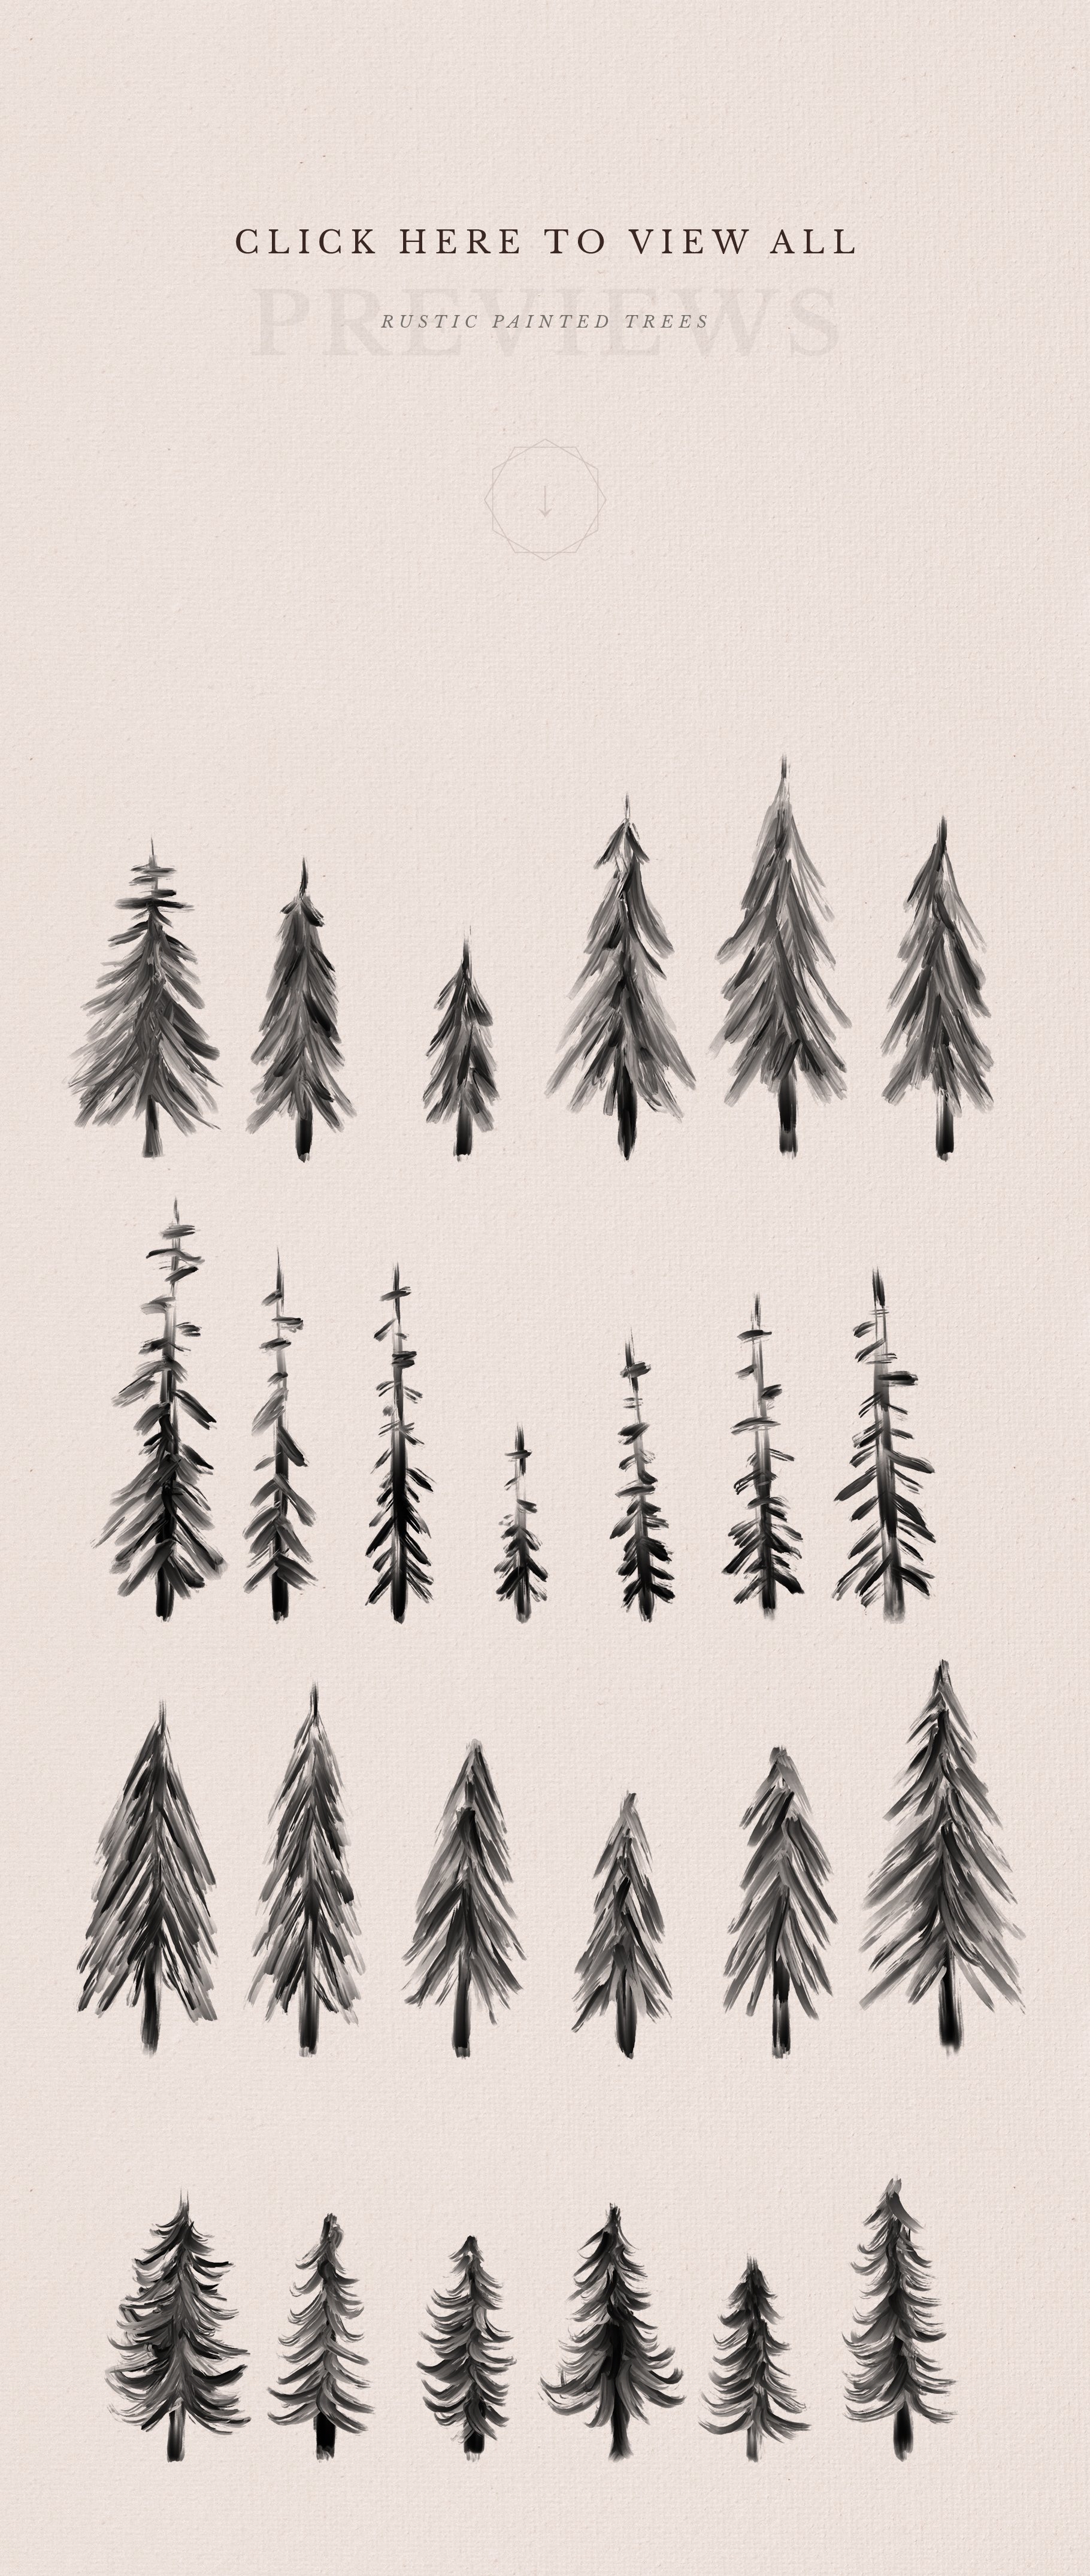 Bunch of trees that are drawn in black ink.